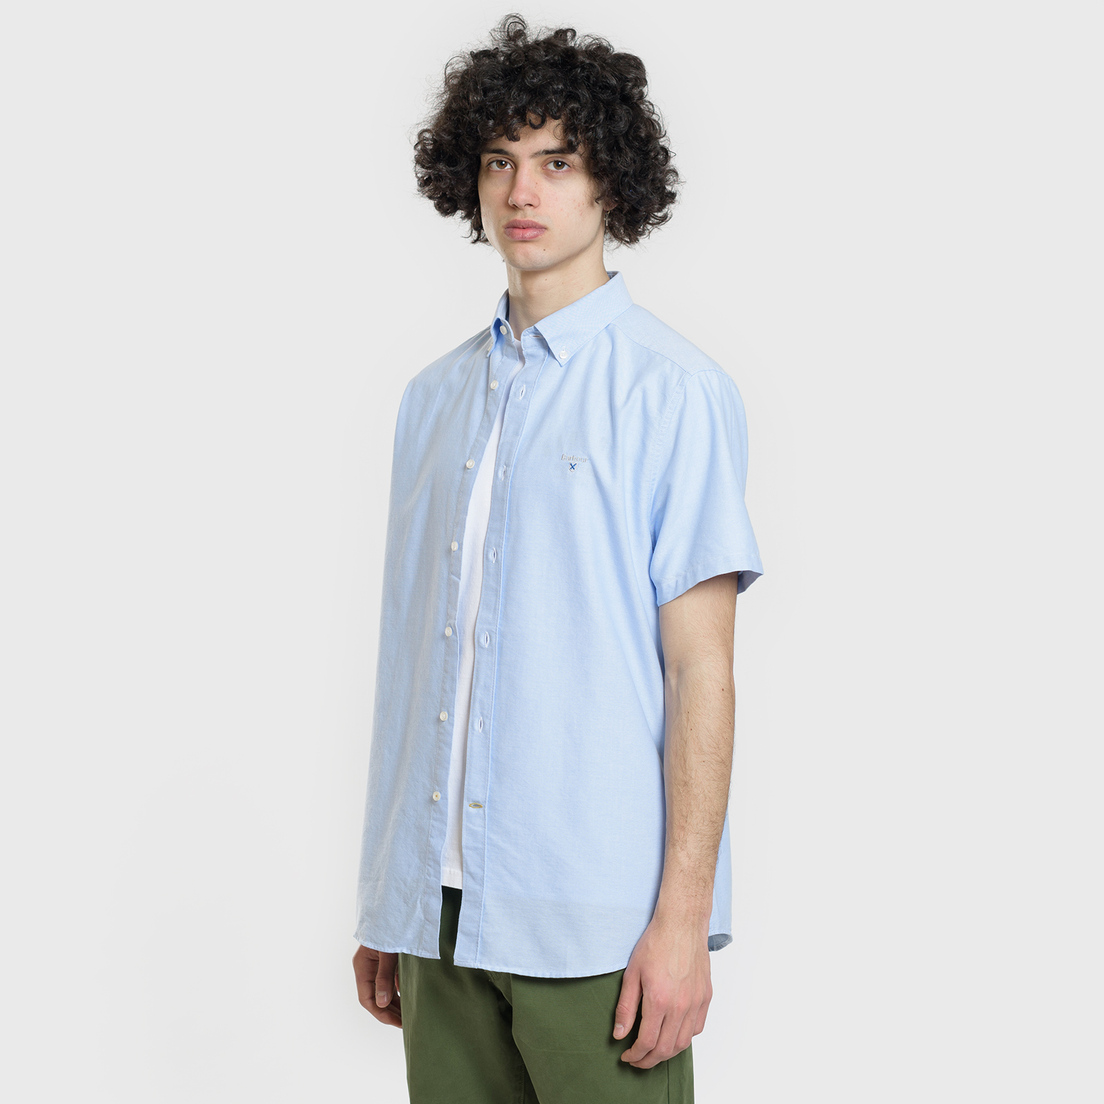 Barbour Мужская рубашка Oxford S/S Tailored